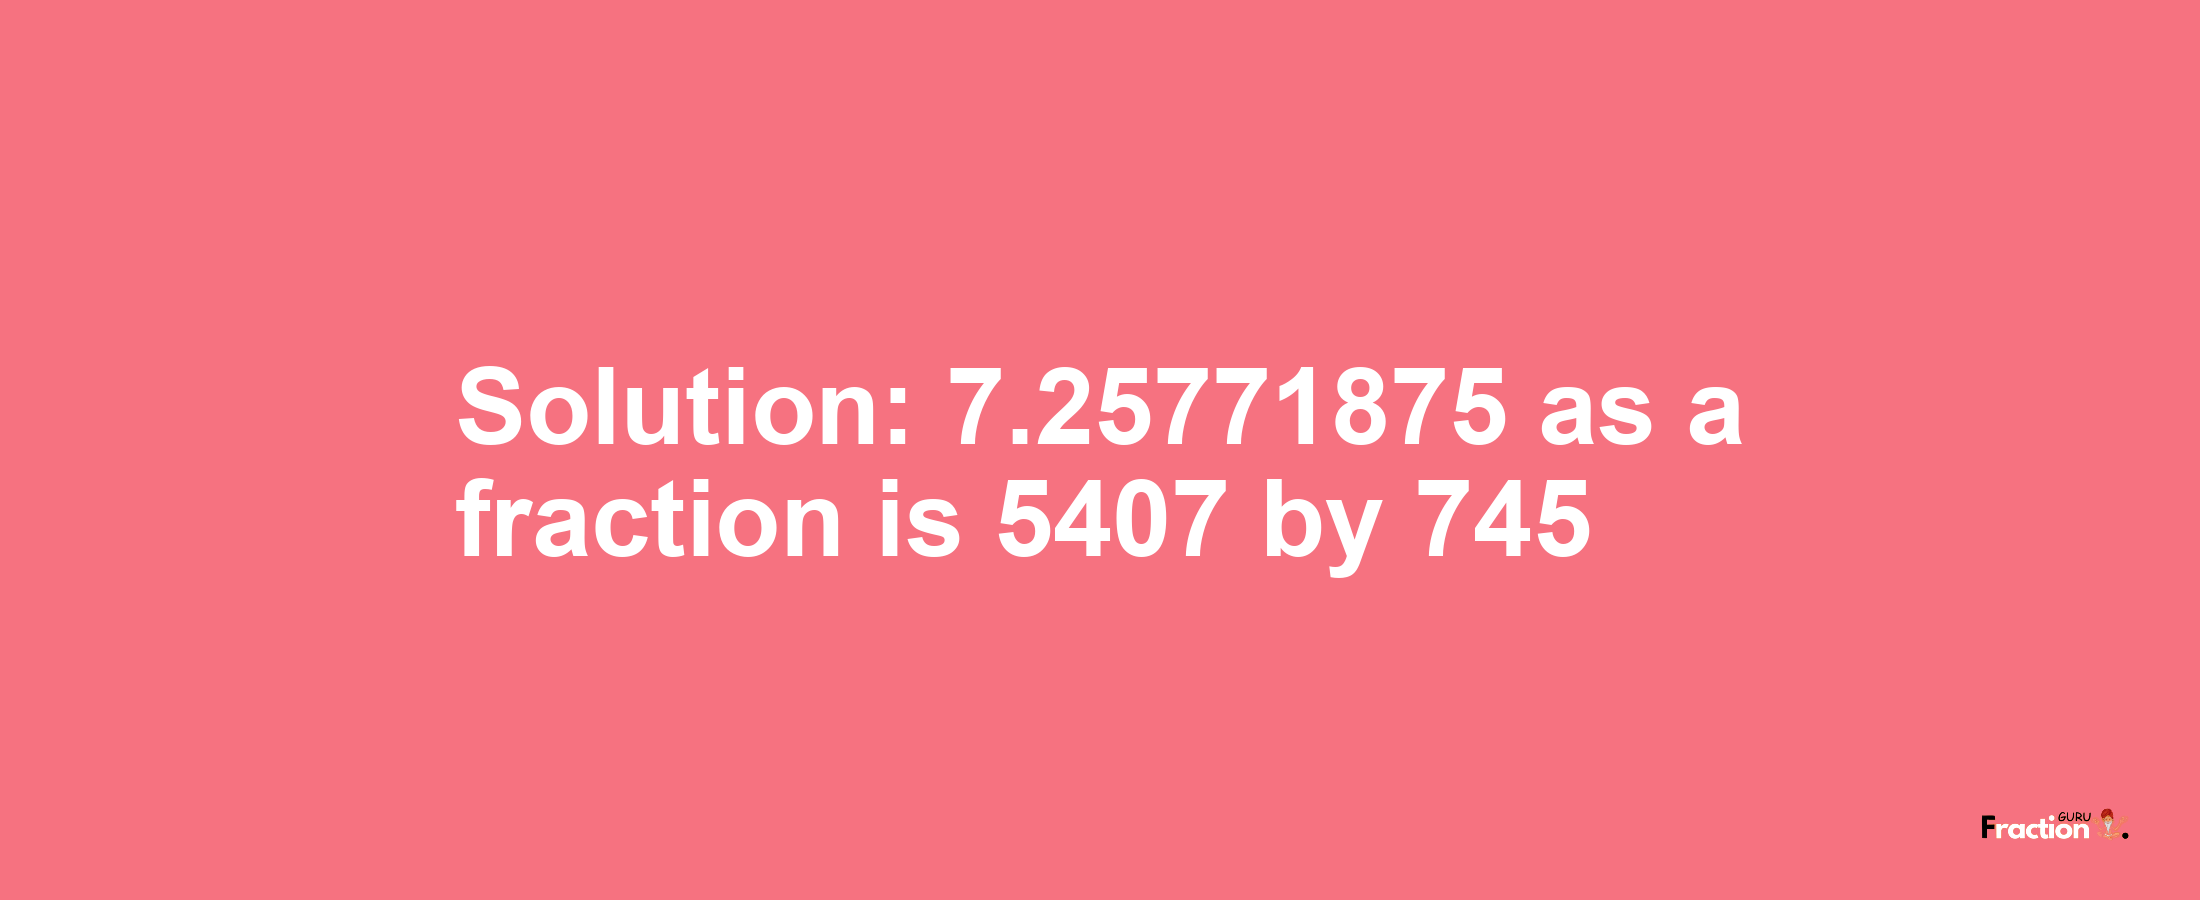 Solution:7.25771875 as a fraction is 5407/745